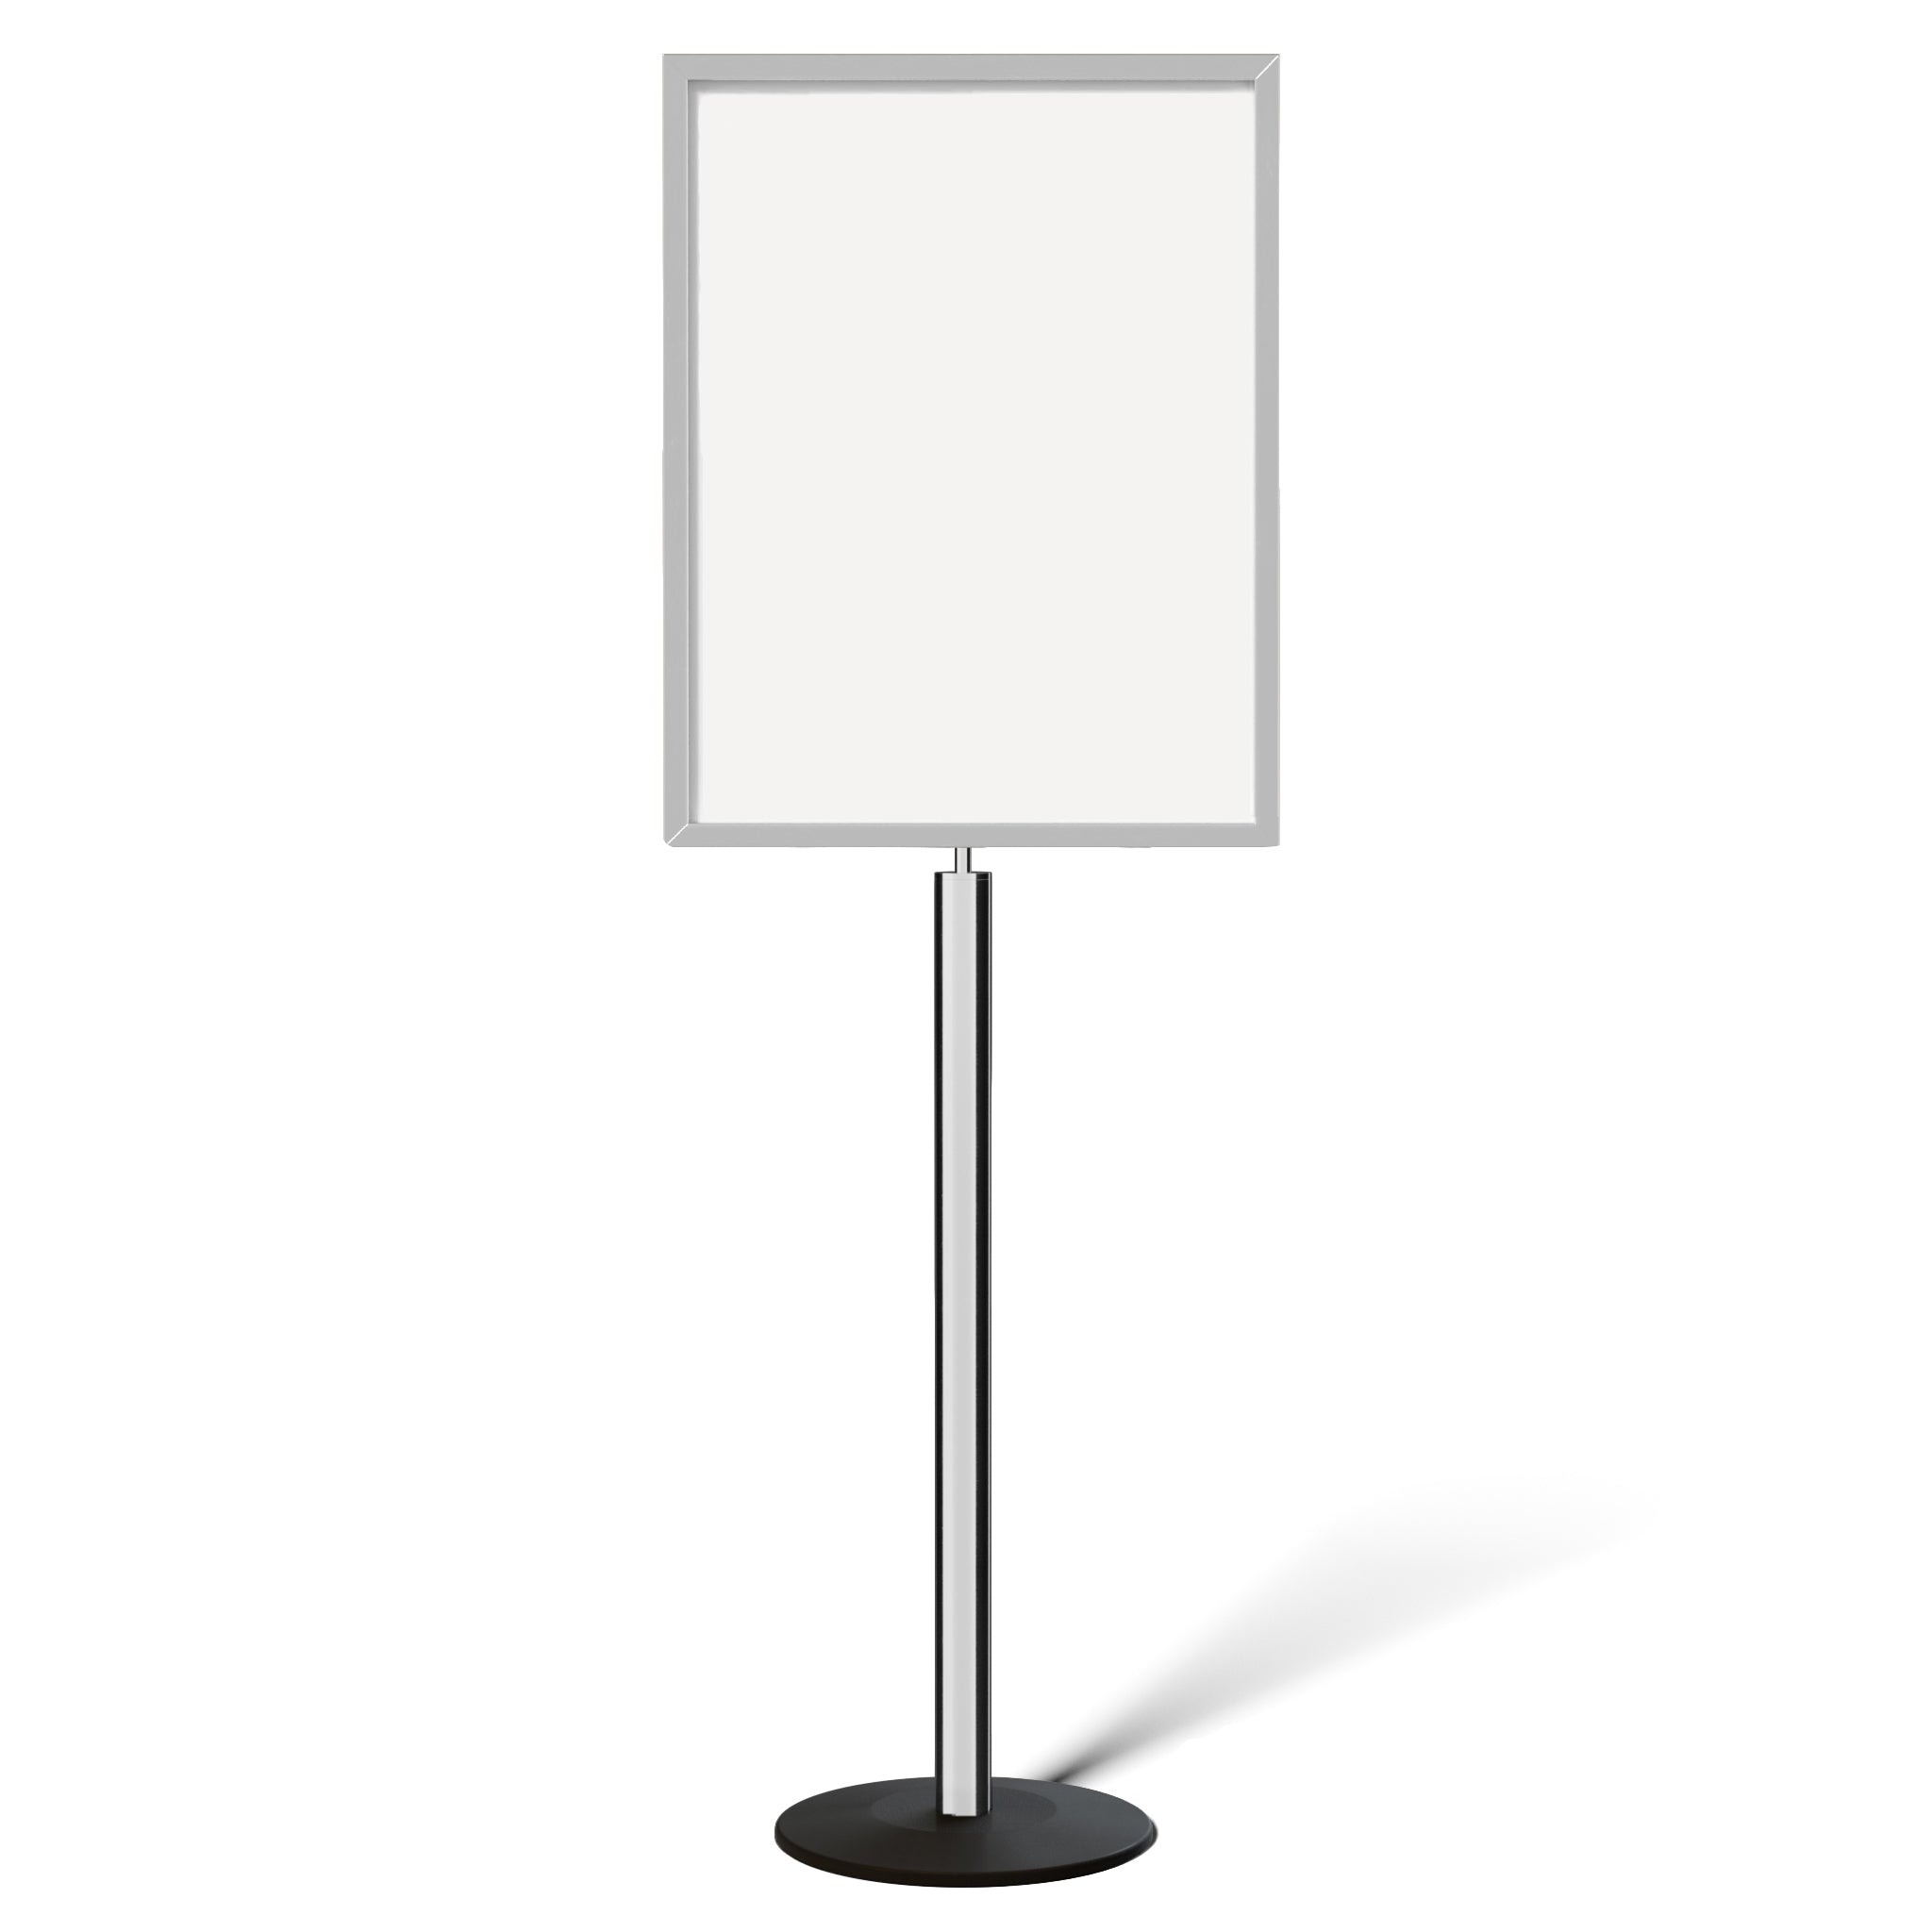 SQUARE BASE SINGLE POSTER STAND 22IN X 28IN